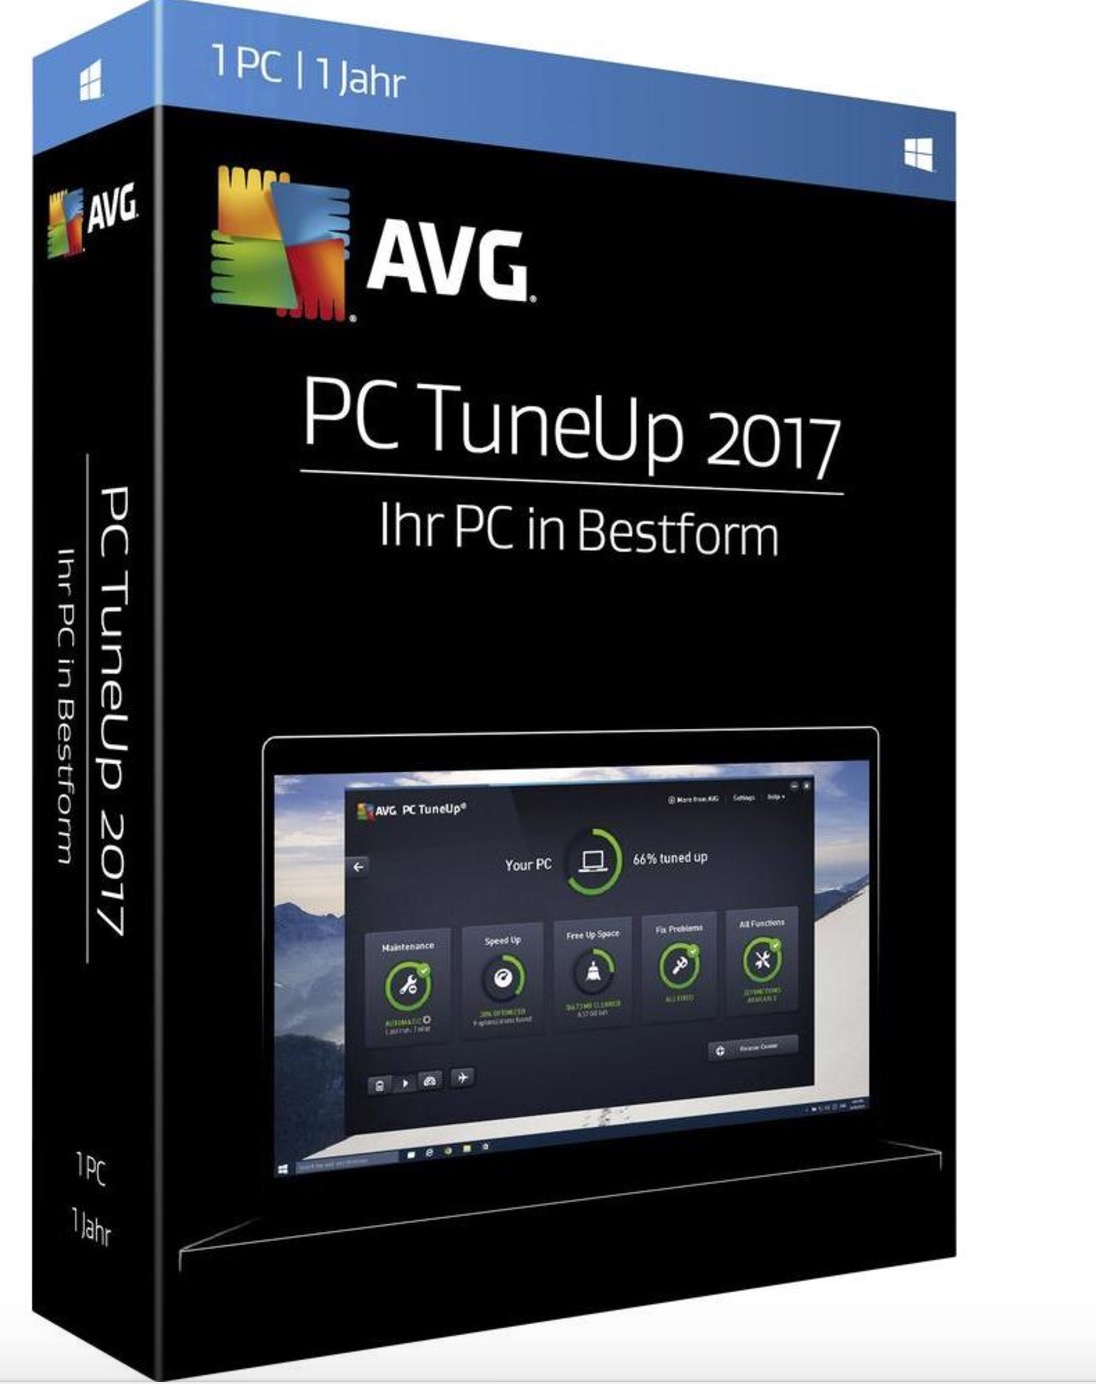 AVG TuneUp CD Key (Digital Download) - Various Options Available: 3 Devices